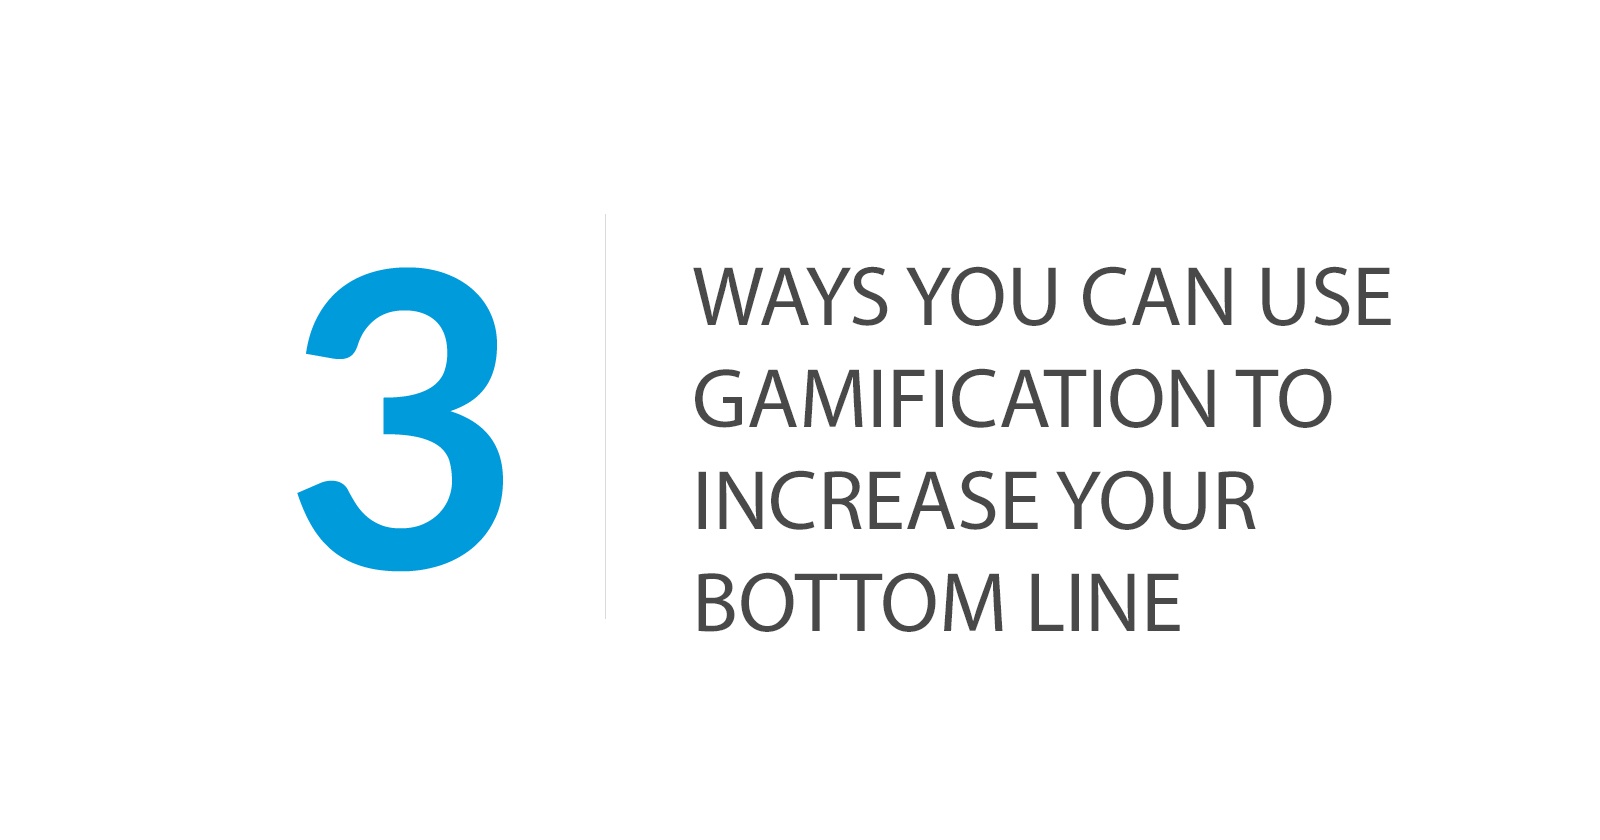 3-ways-you-can-use-gamificaton-to-increase-your-bottom-line.jpg?noresize